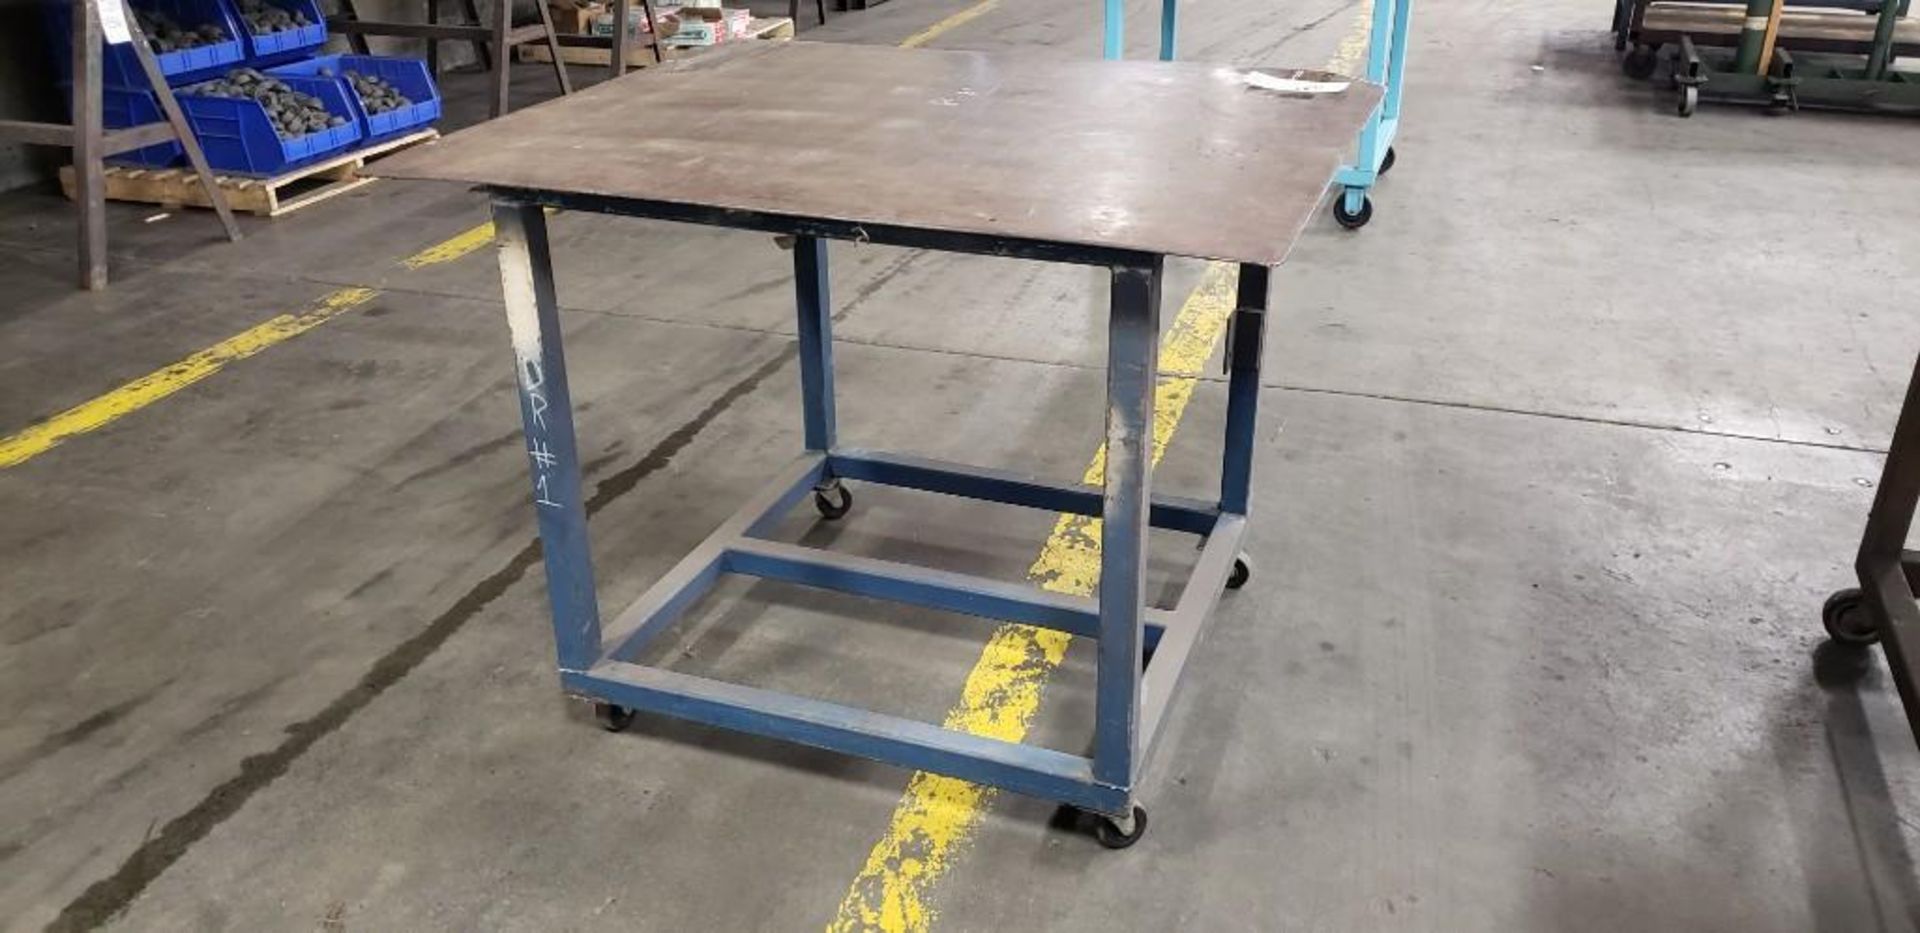 STEEL TABLE 42"X48" 38.5" HIGH, ROLLING